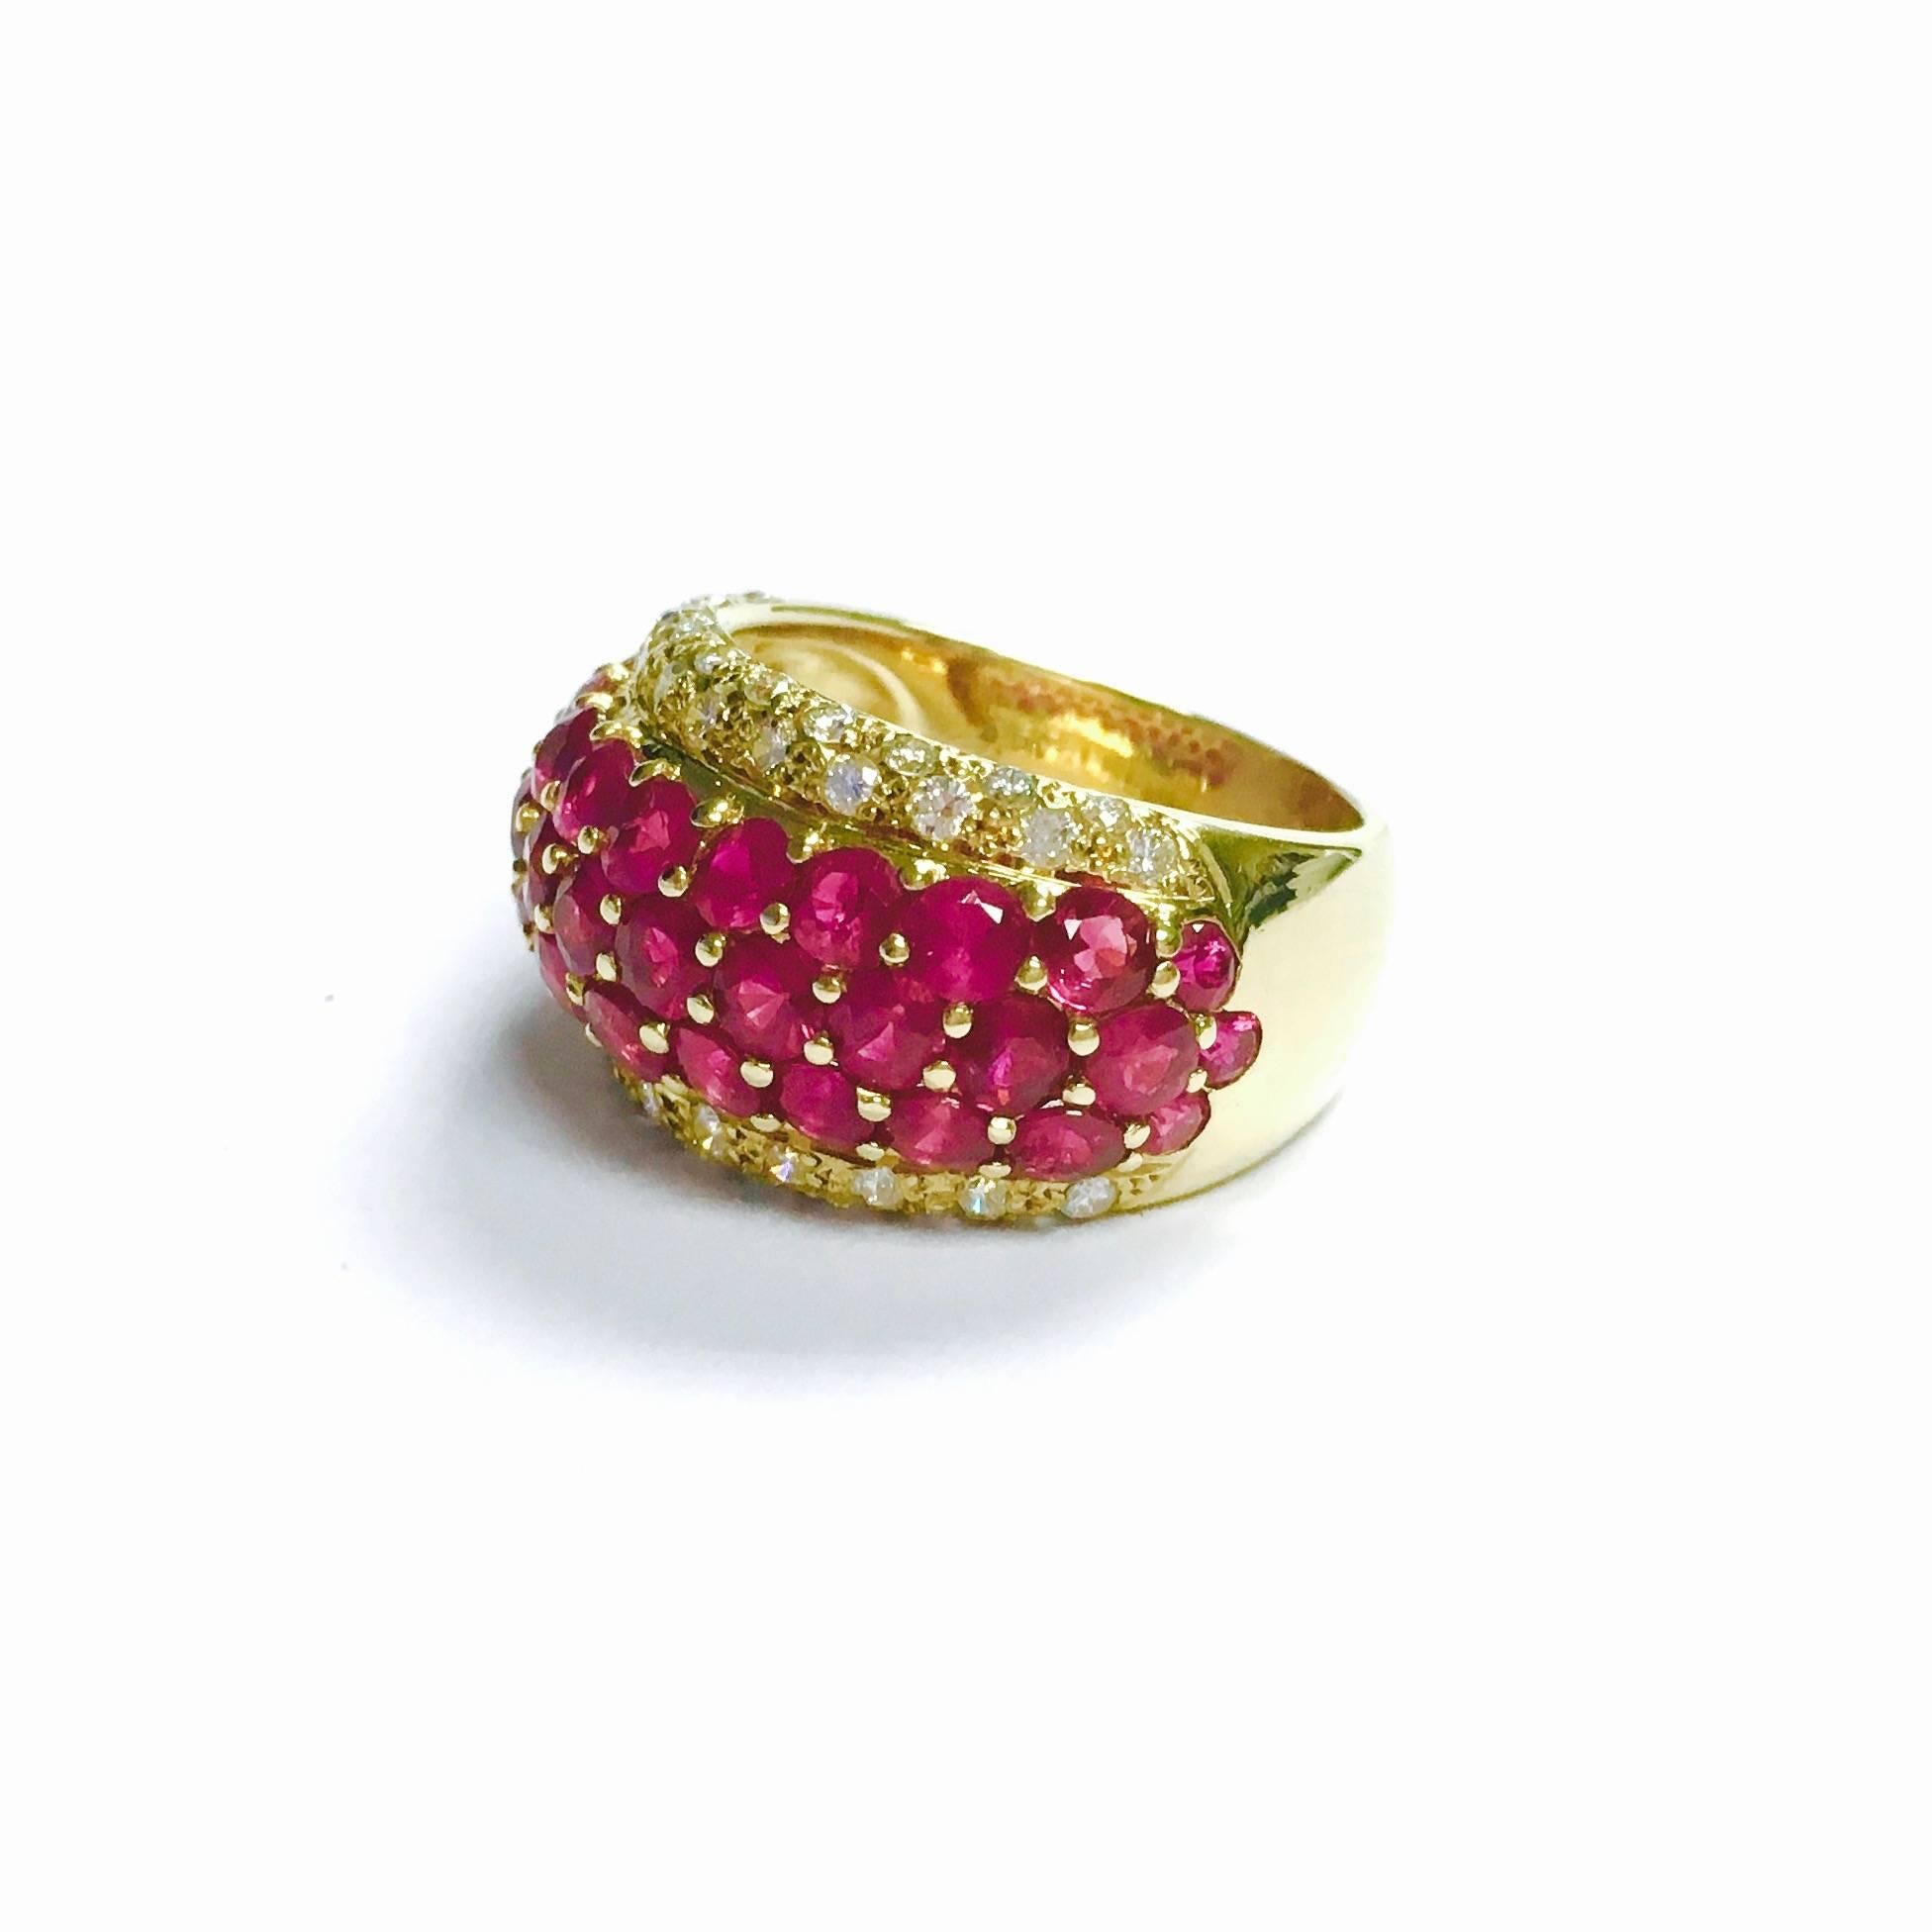 18K yellow gold, approximately 0.5 inch (13mm) wide, slightly domed ring featuring three rows of vivid round cut rubies framed bu diamonds, supported by a 0.25" (6.5mm) wide band.
Ruby: 4.57ctw (stamped inside)
Diamond: 0.63ctw (stamped inside)